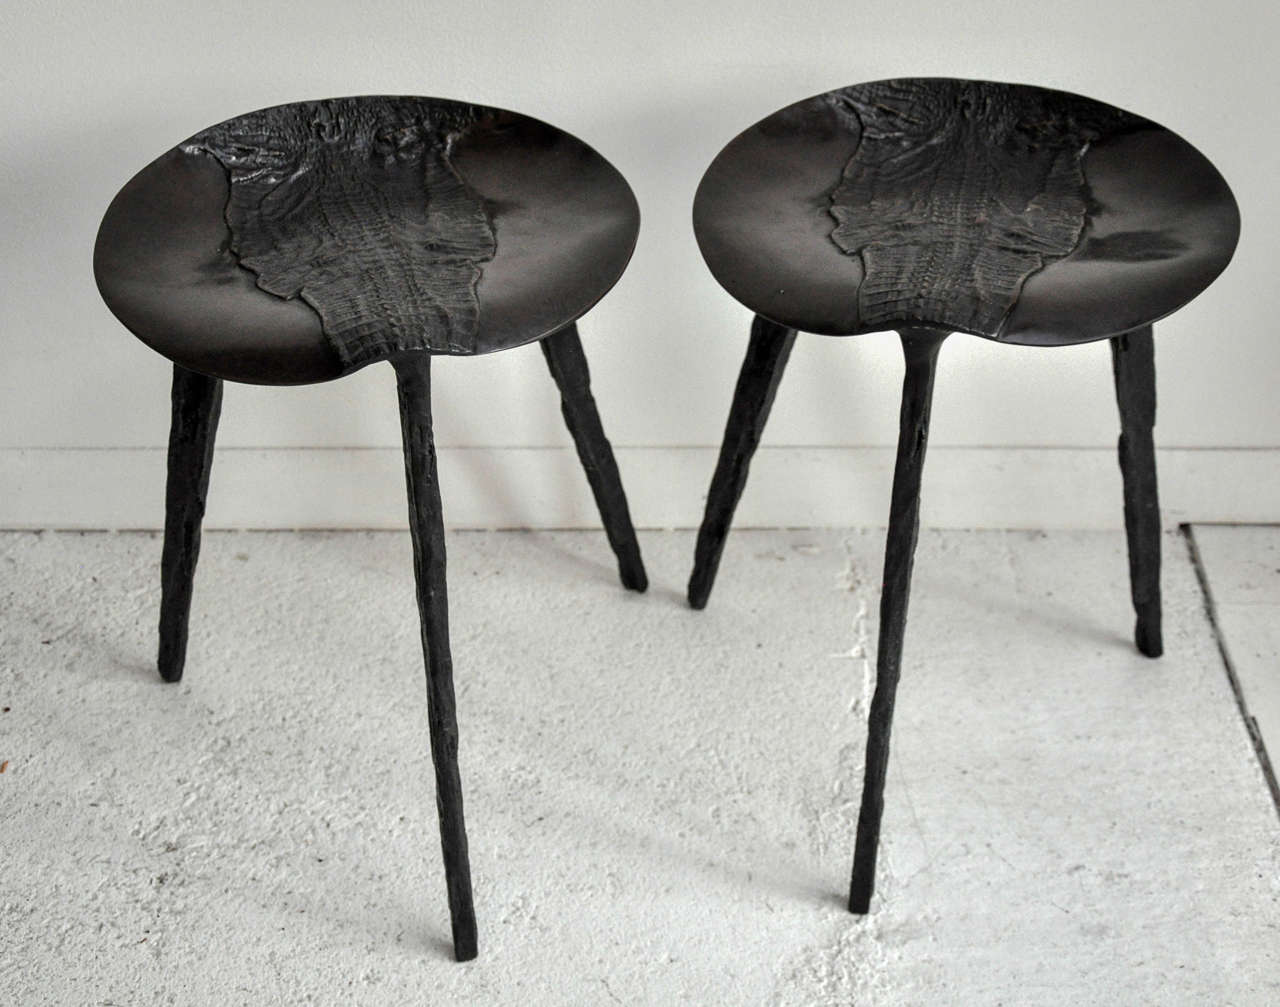 Pair of brass alligator stools handsomely done in a dark brown finish.